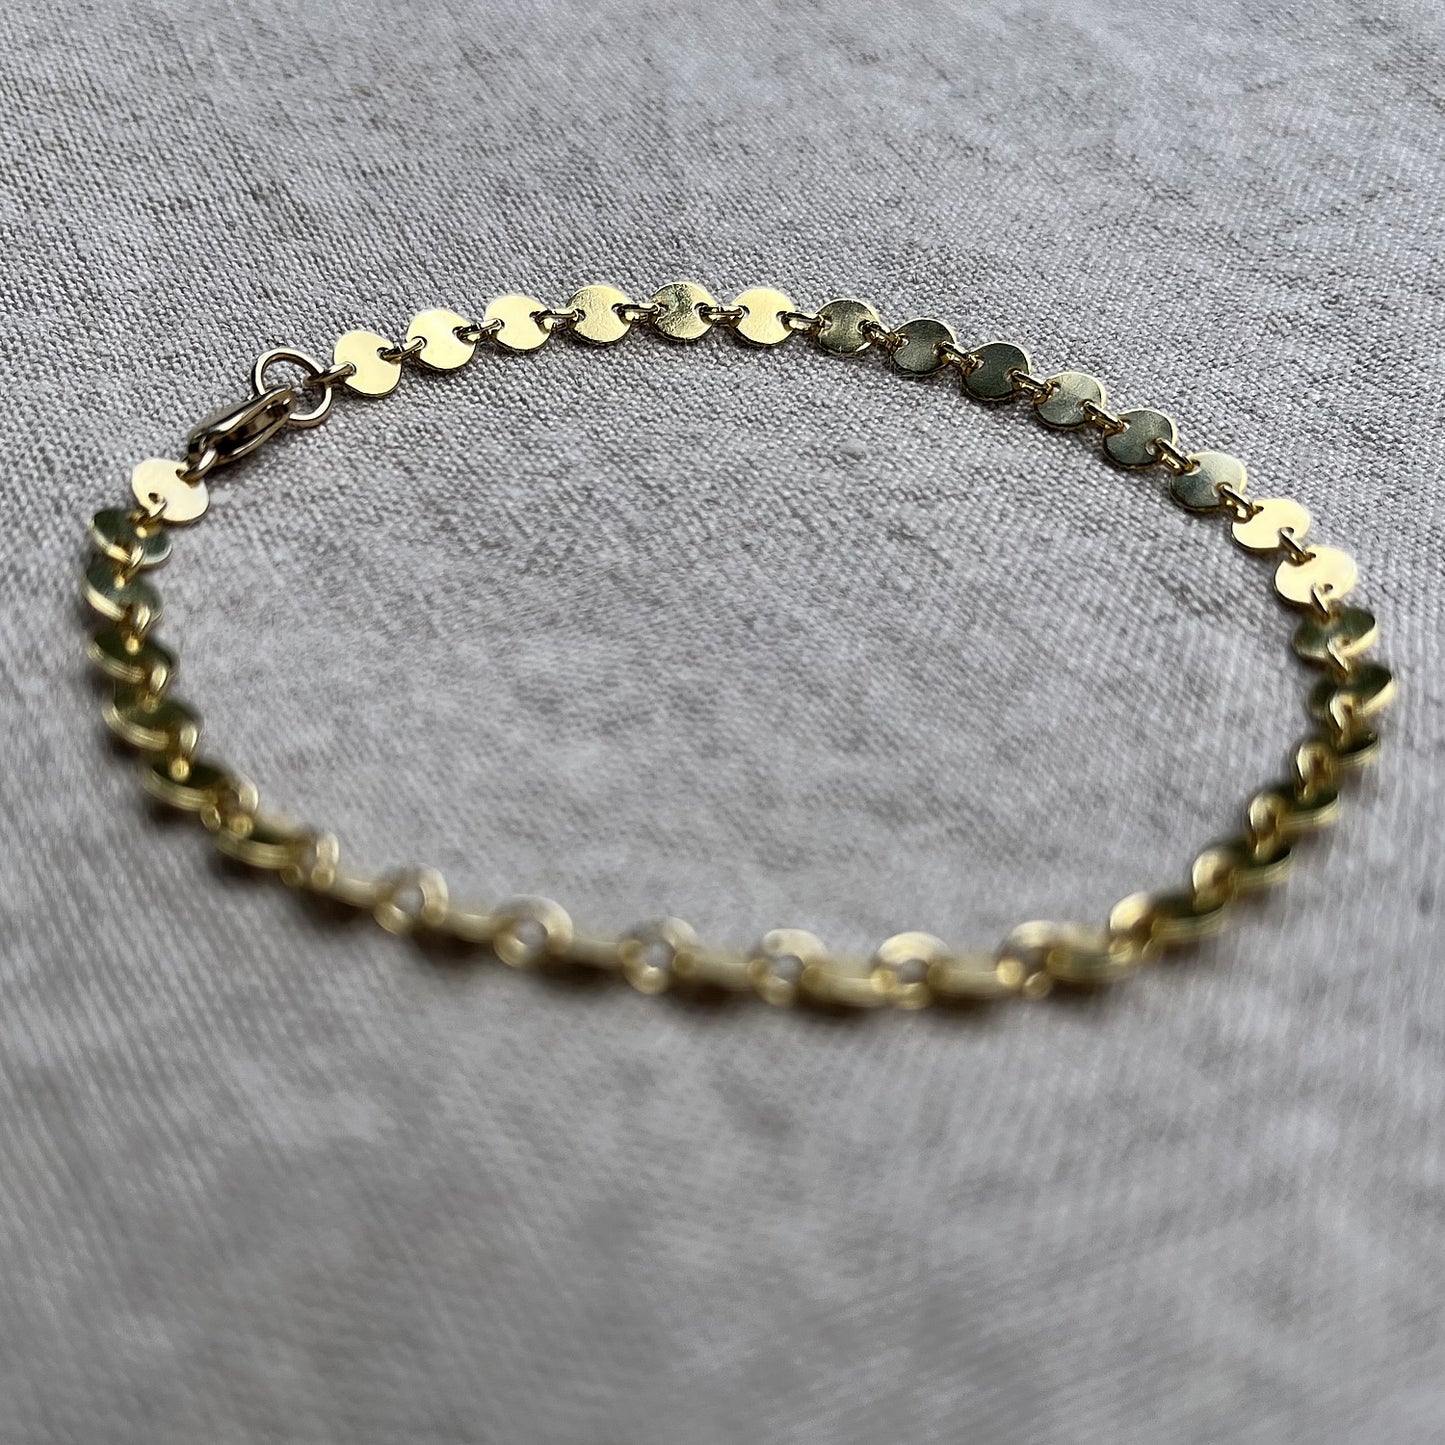 14k gold filled coin chain bracelet on a linen background